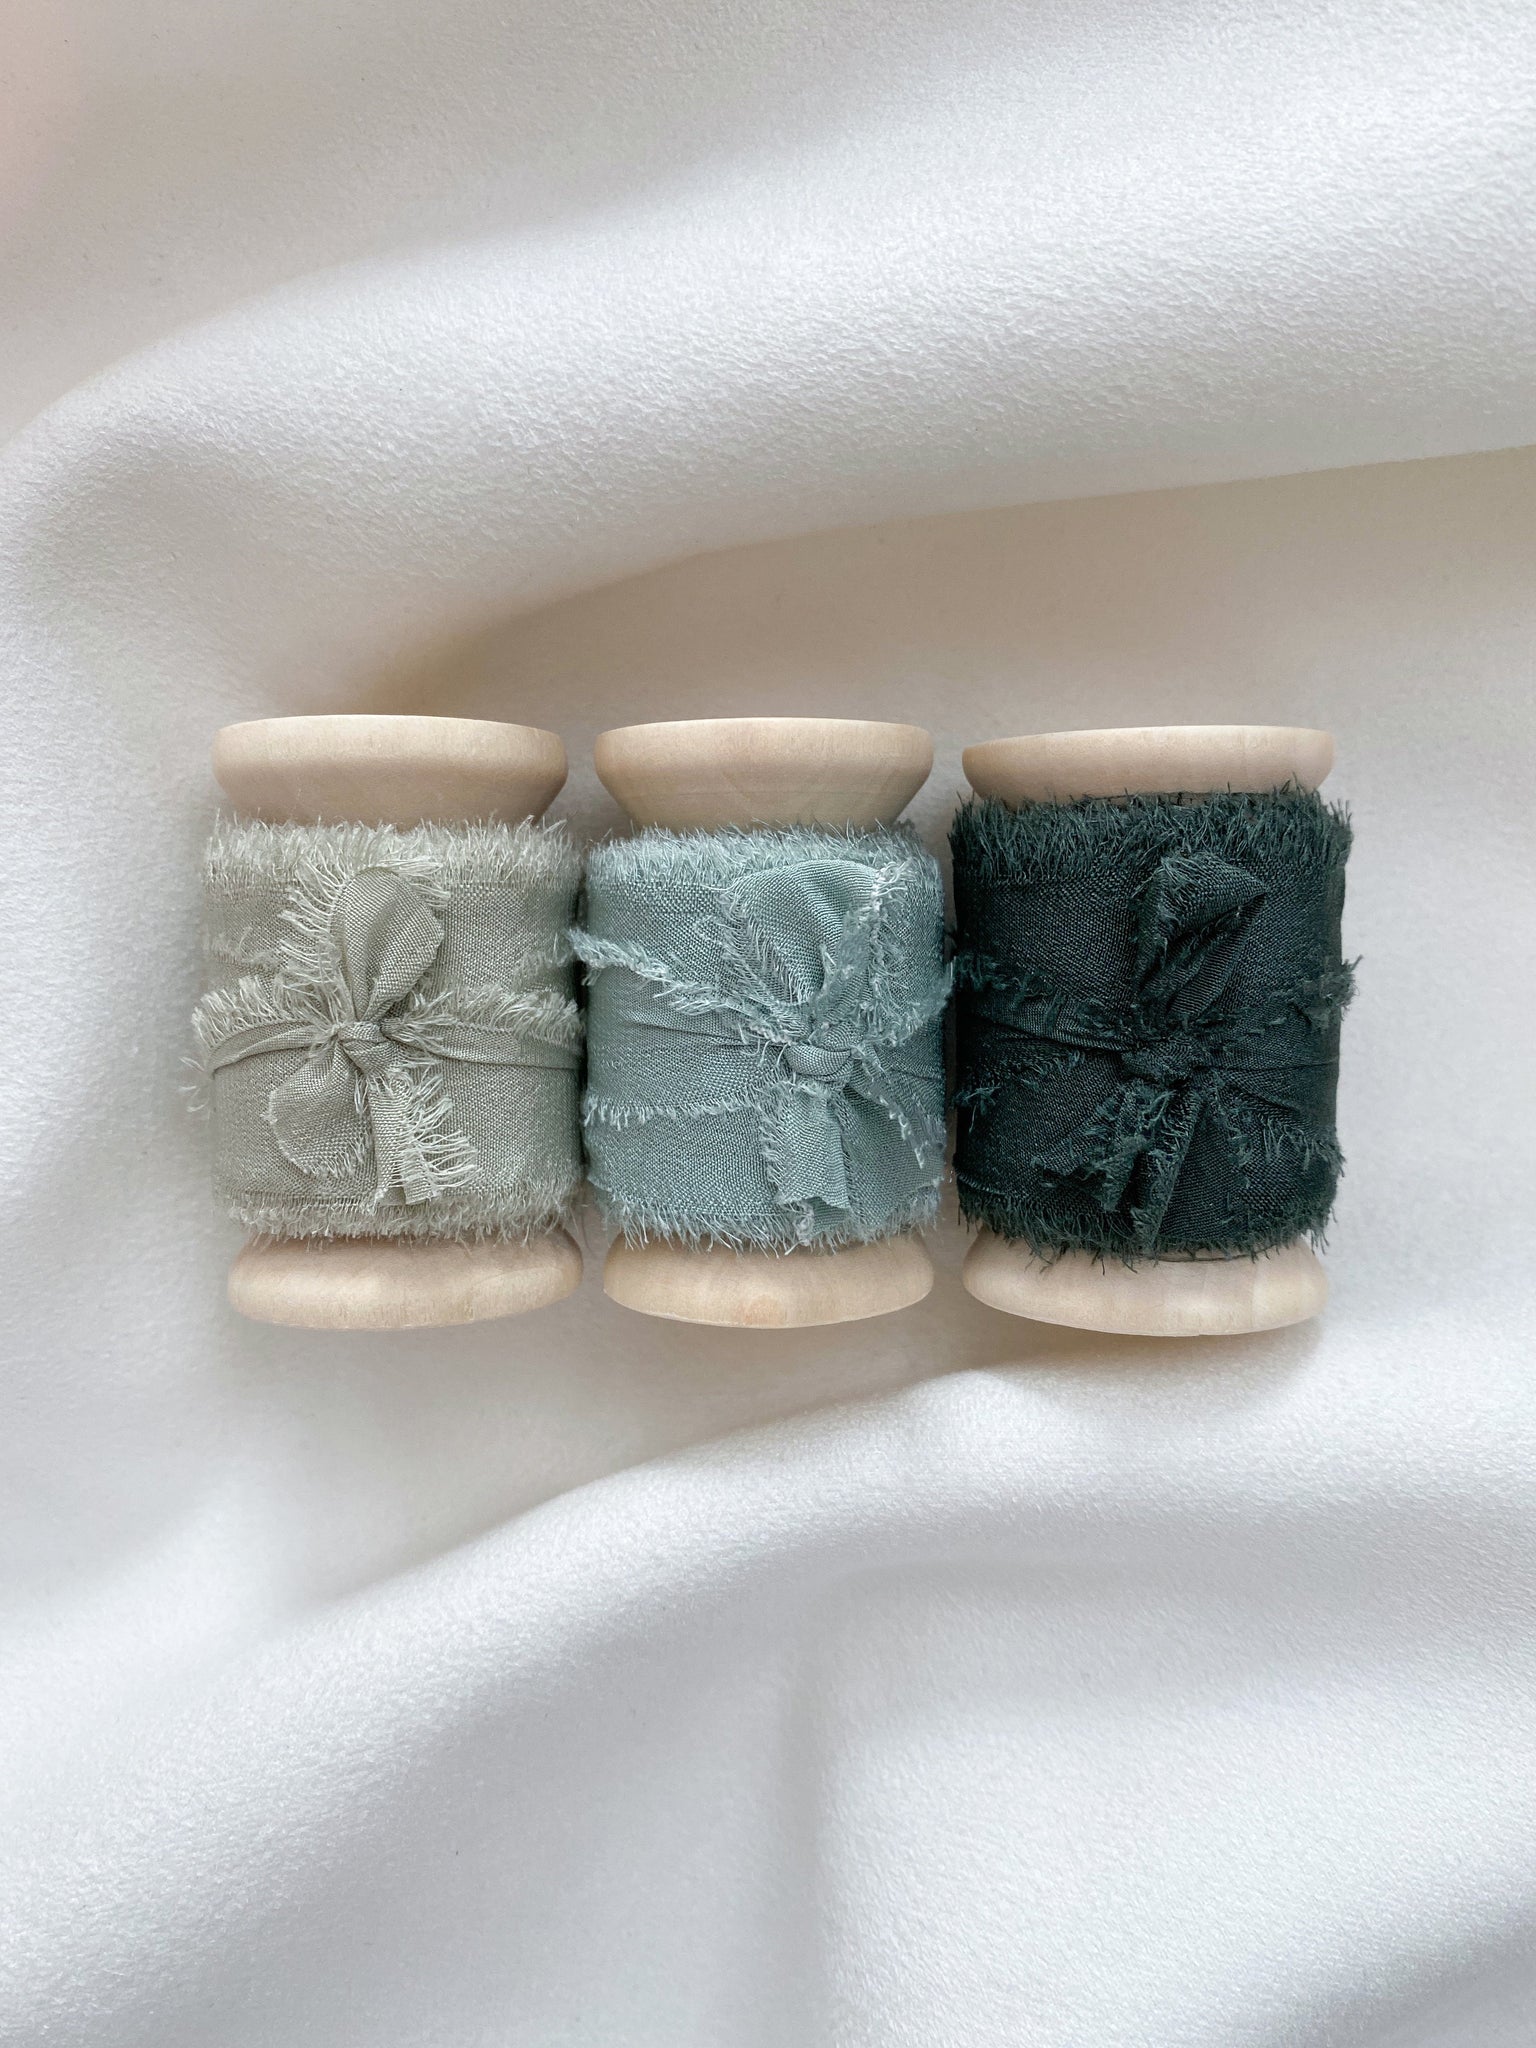 Raw edge 1 inch silk ribbon set of 3 in color Sage, Lake Green, and Forest Green